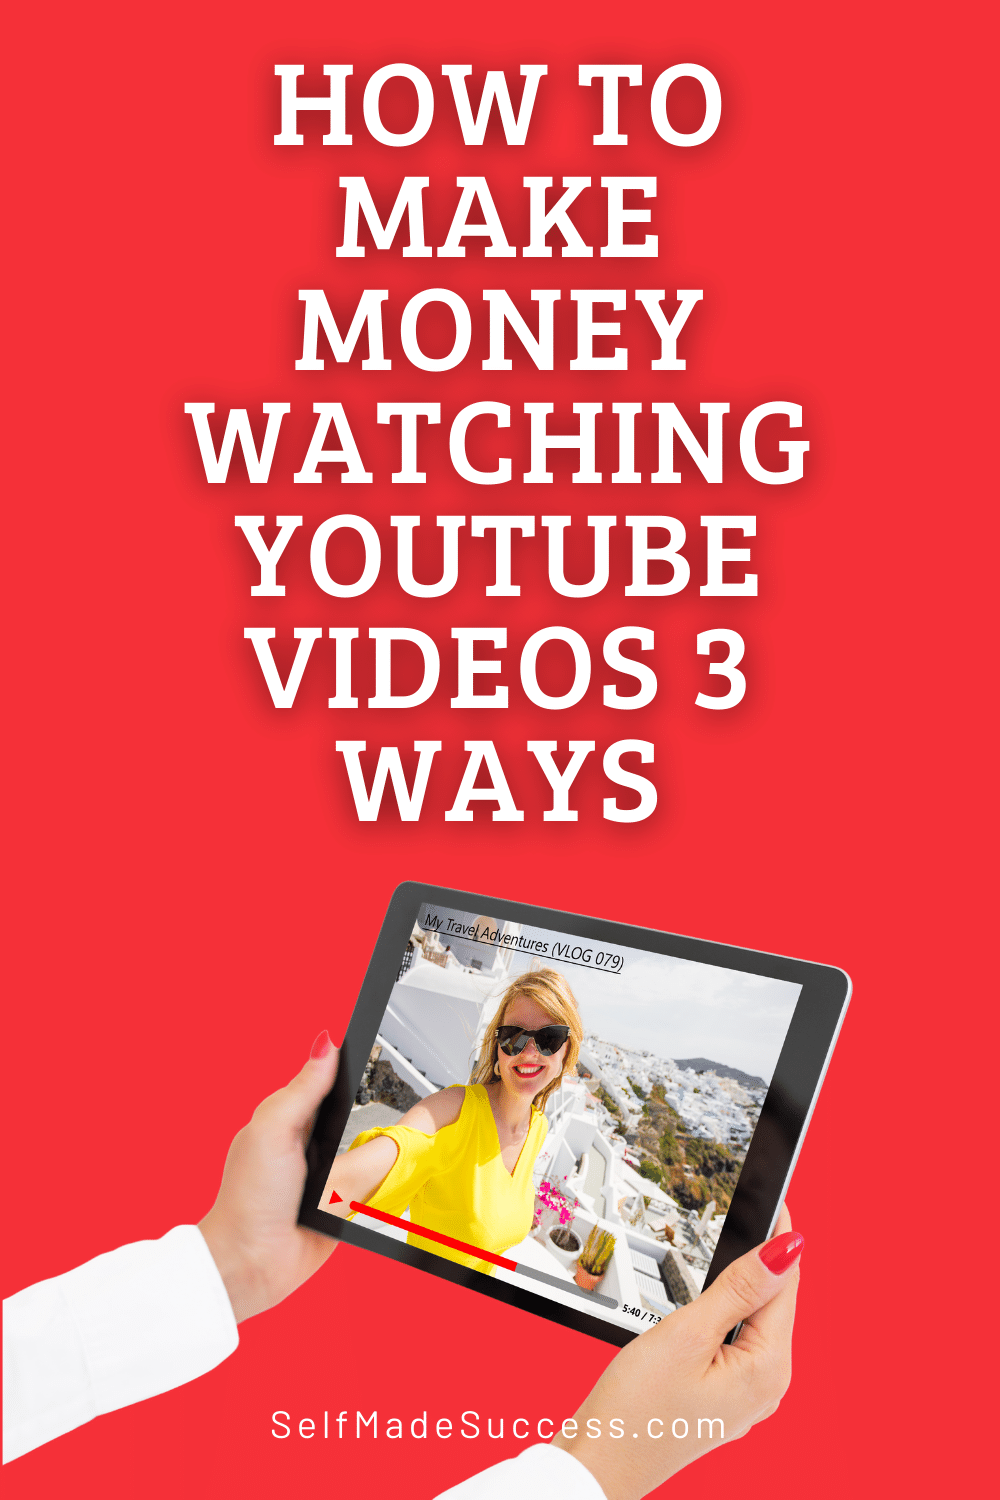 7 Ways to Make Money Watching YouTube Videos Online at 2550/Hour